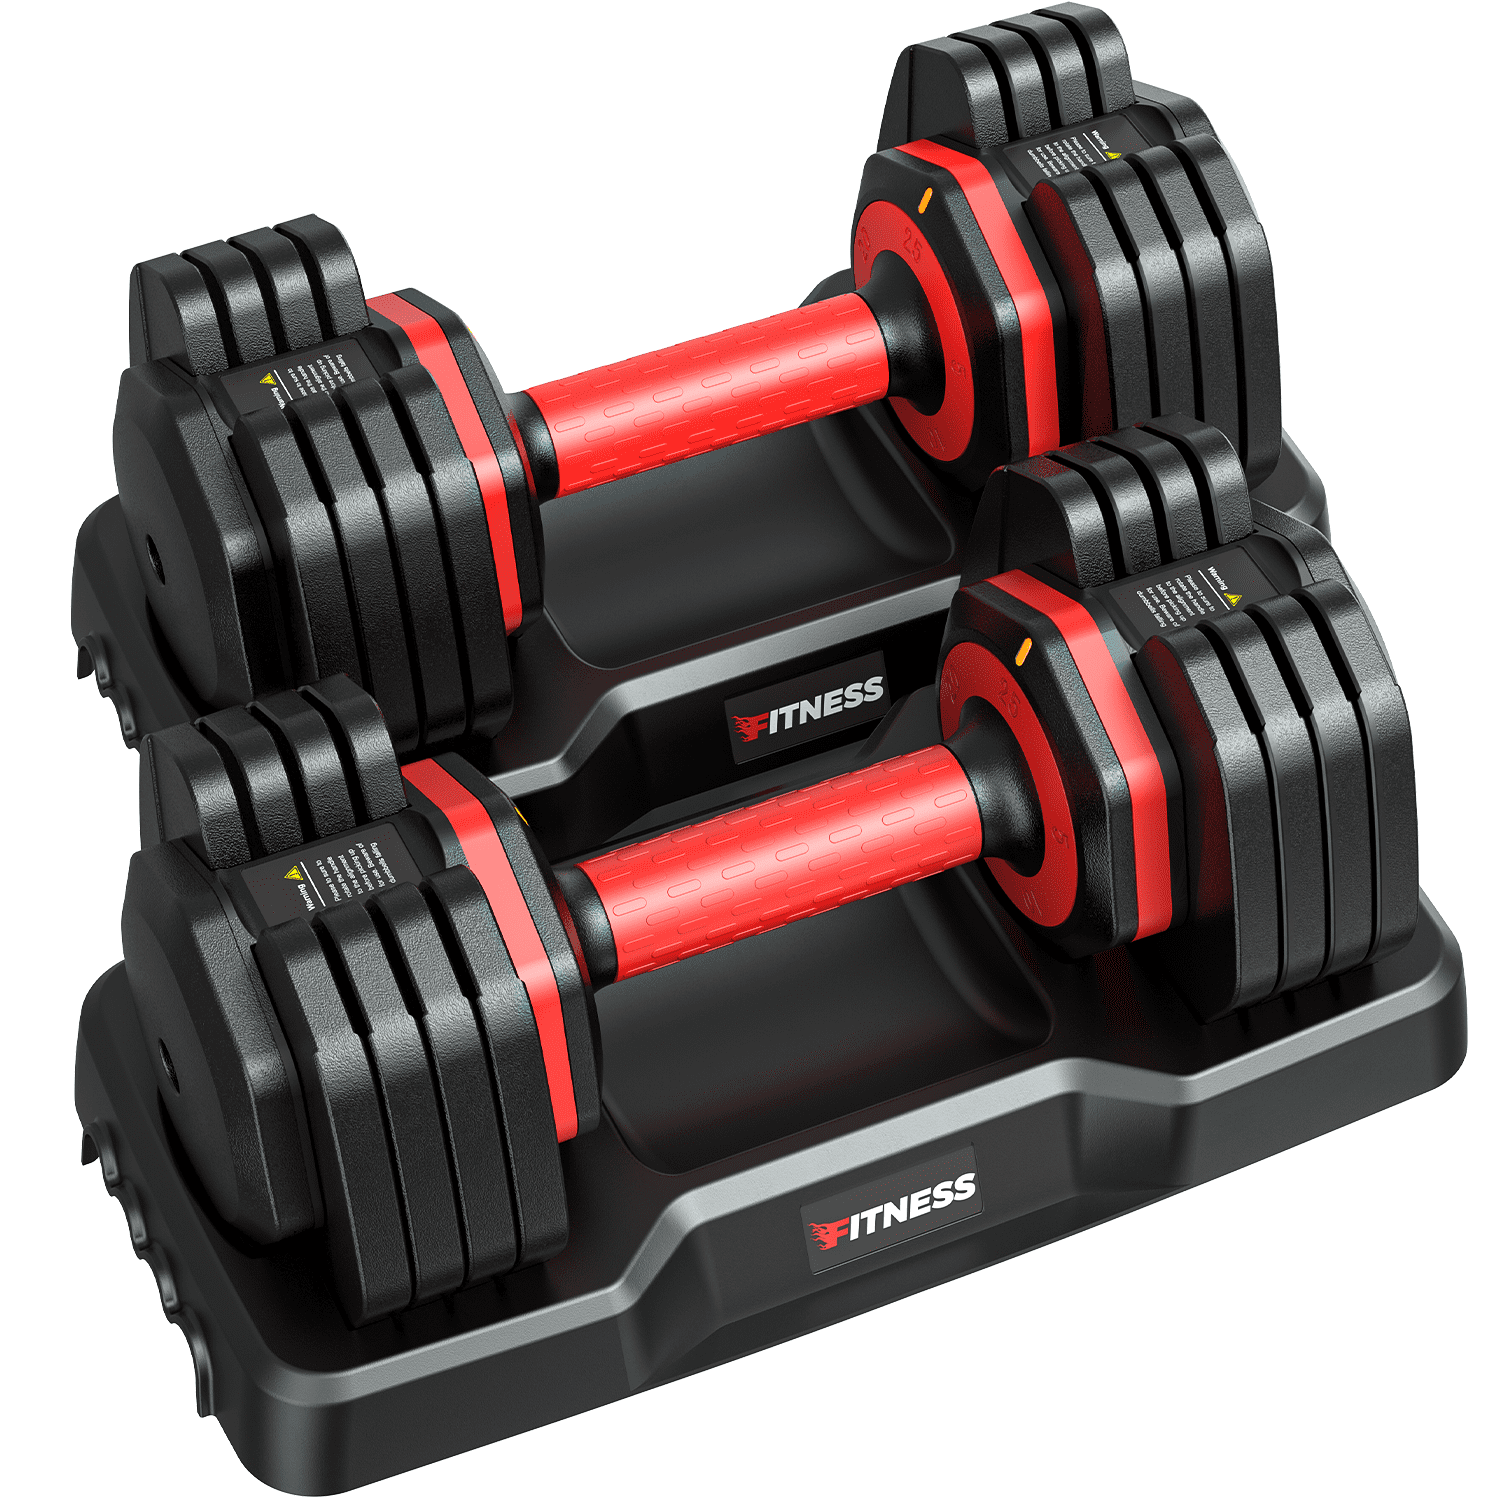  Syhood Adjustable Weight Dumbbells for Women at Home, Hand  Weights Sets of 2 for Women Men Exercise Fitness for Home(Orange, 8.8 Ibs)  : Sports & Outdoors